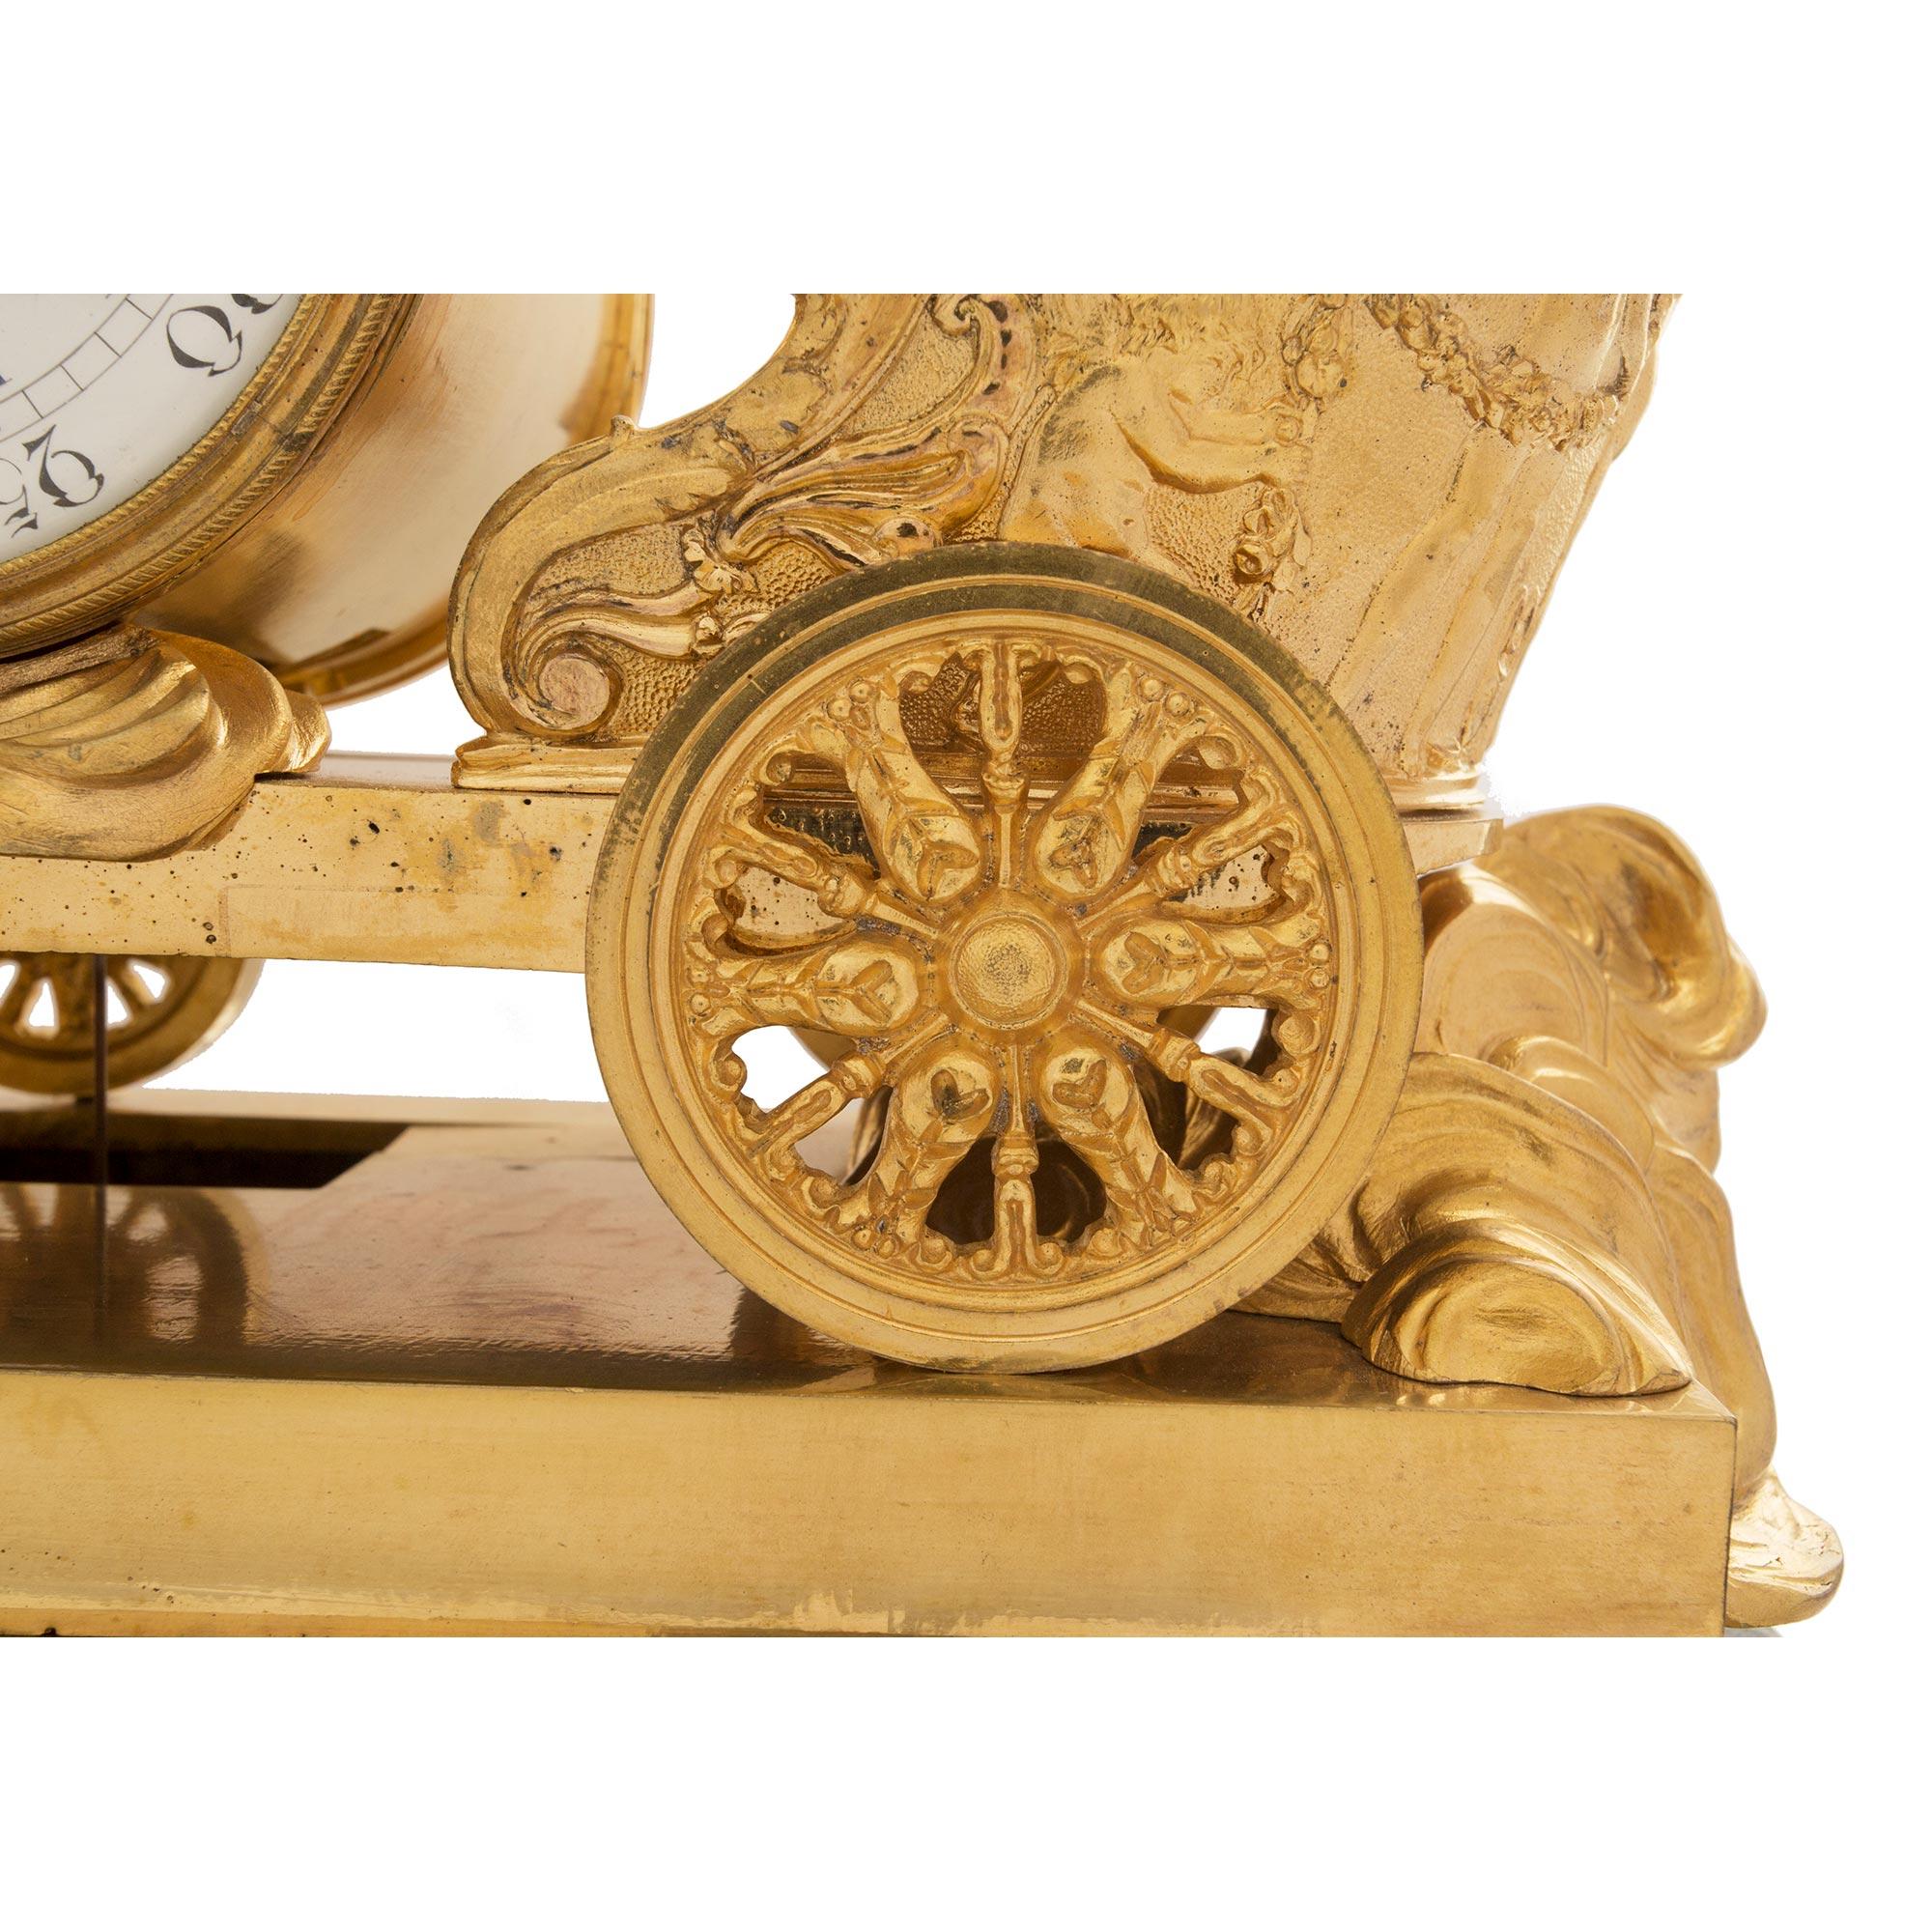 French 19th Century Neoclassical Empire Style Ormolu and Marble Clock For Sale 5